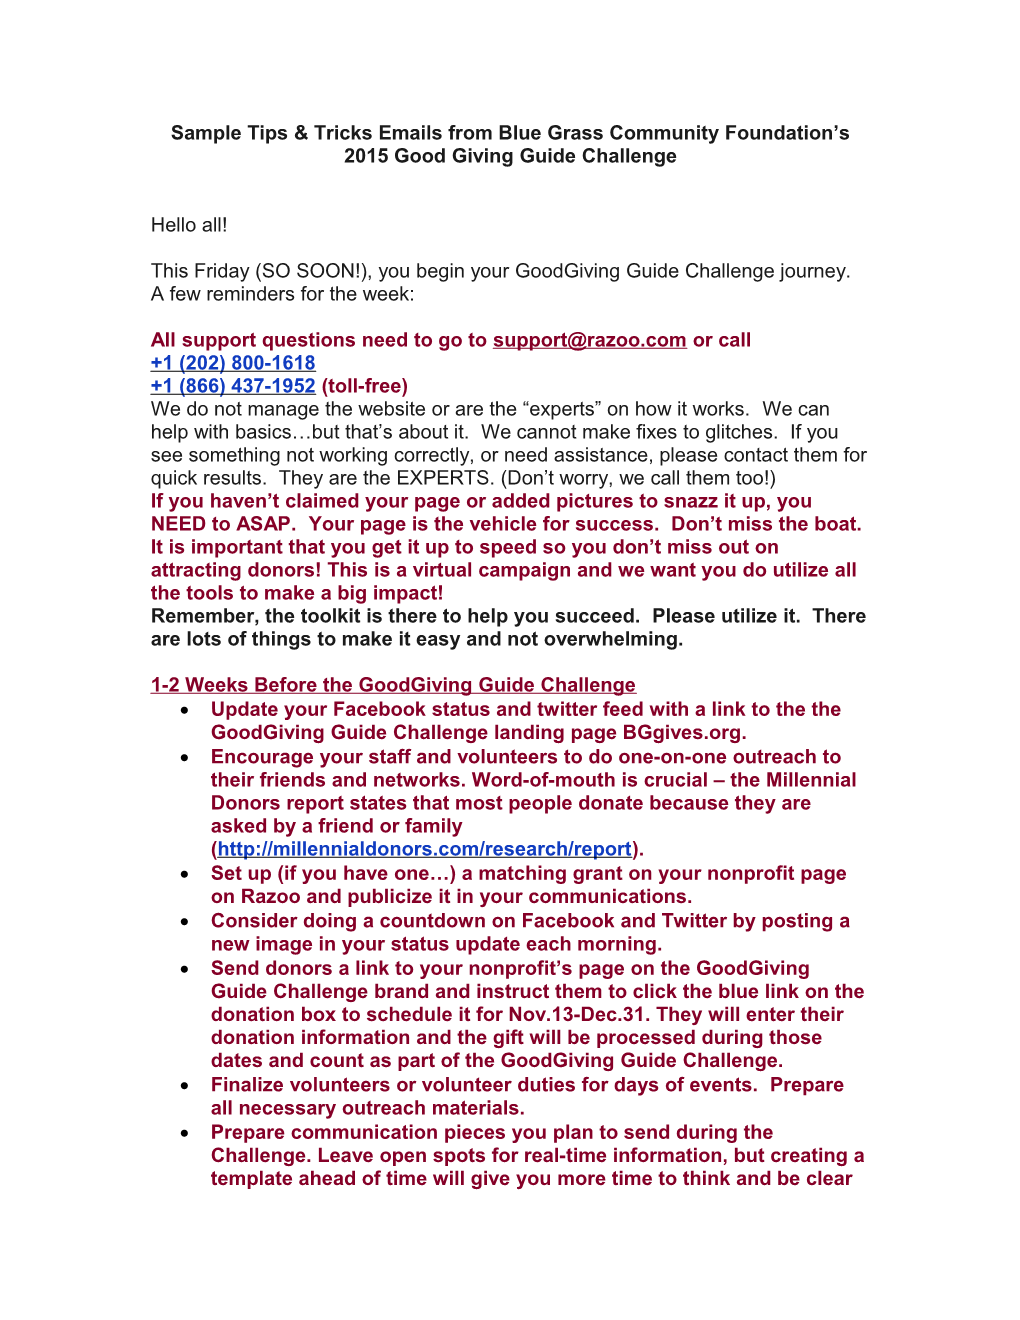 Sample Tips & Tricks Emails from Blue Grass Community Foundation S 2015 Good Giving Guide